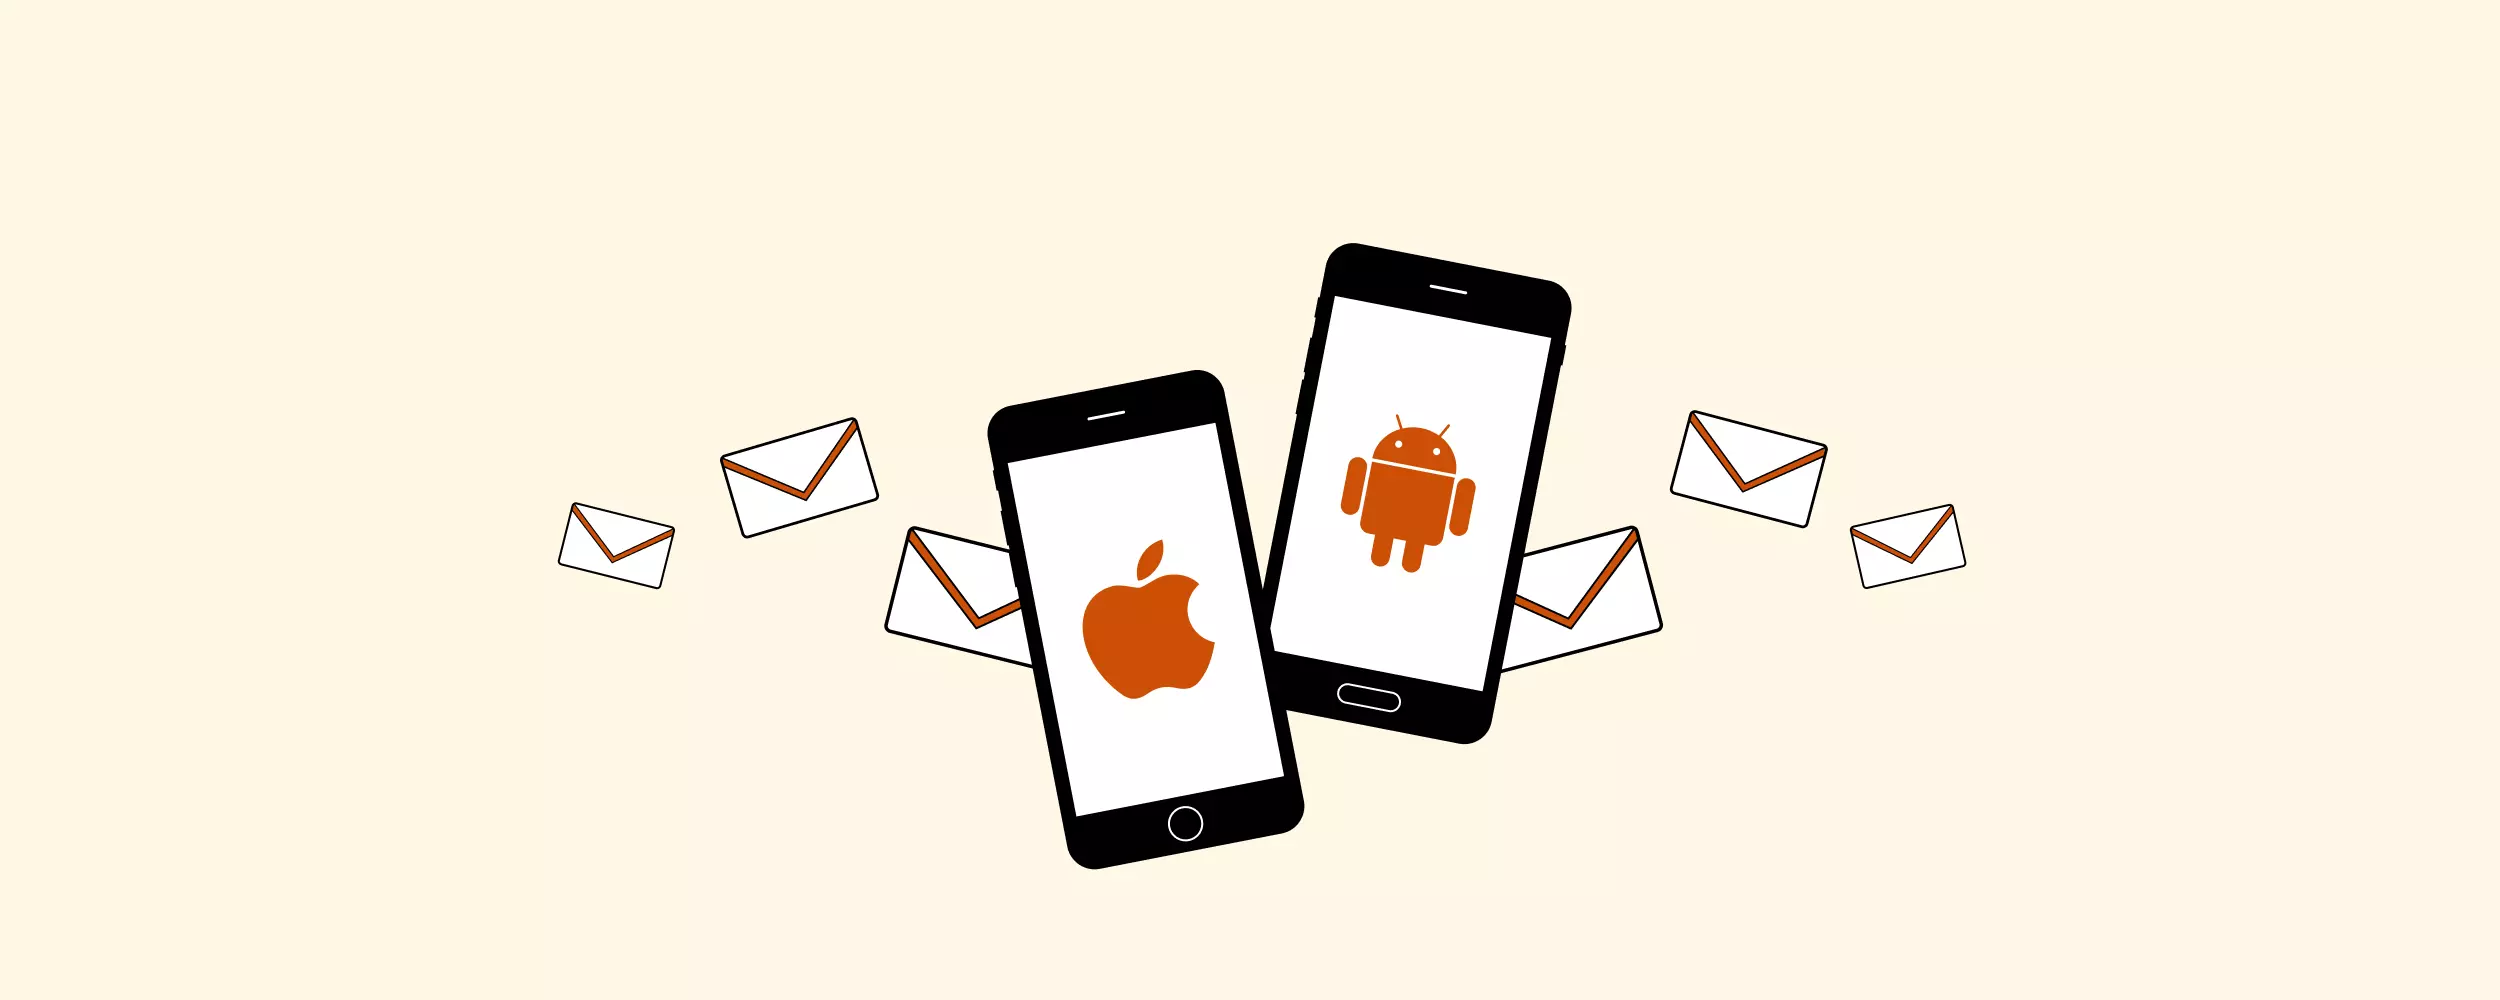 How to Set Up an Email Account on Android and iPhone